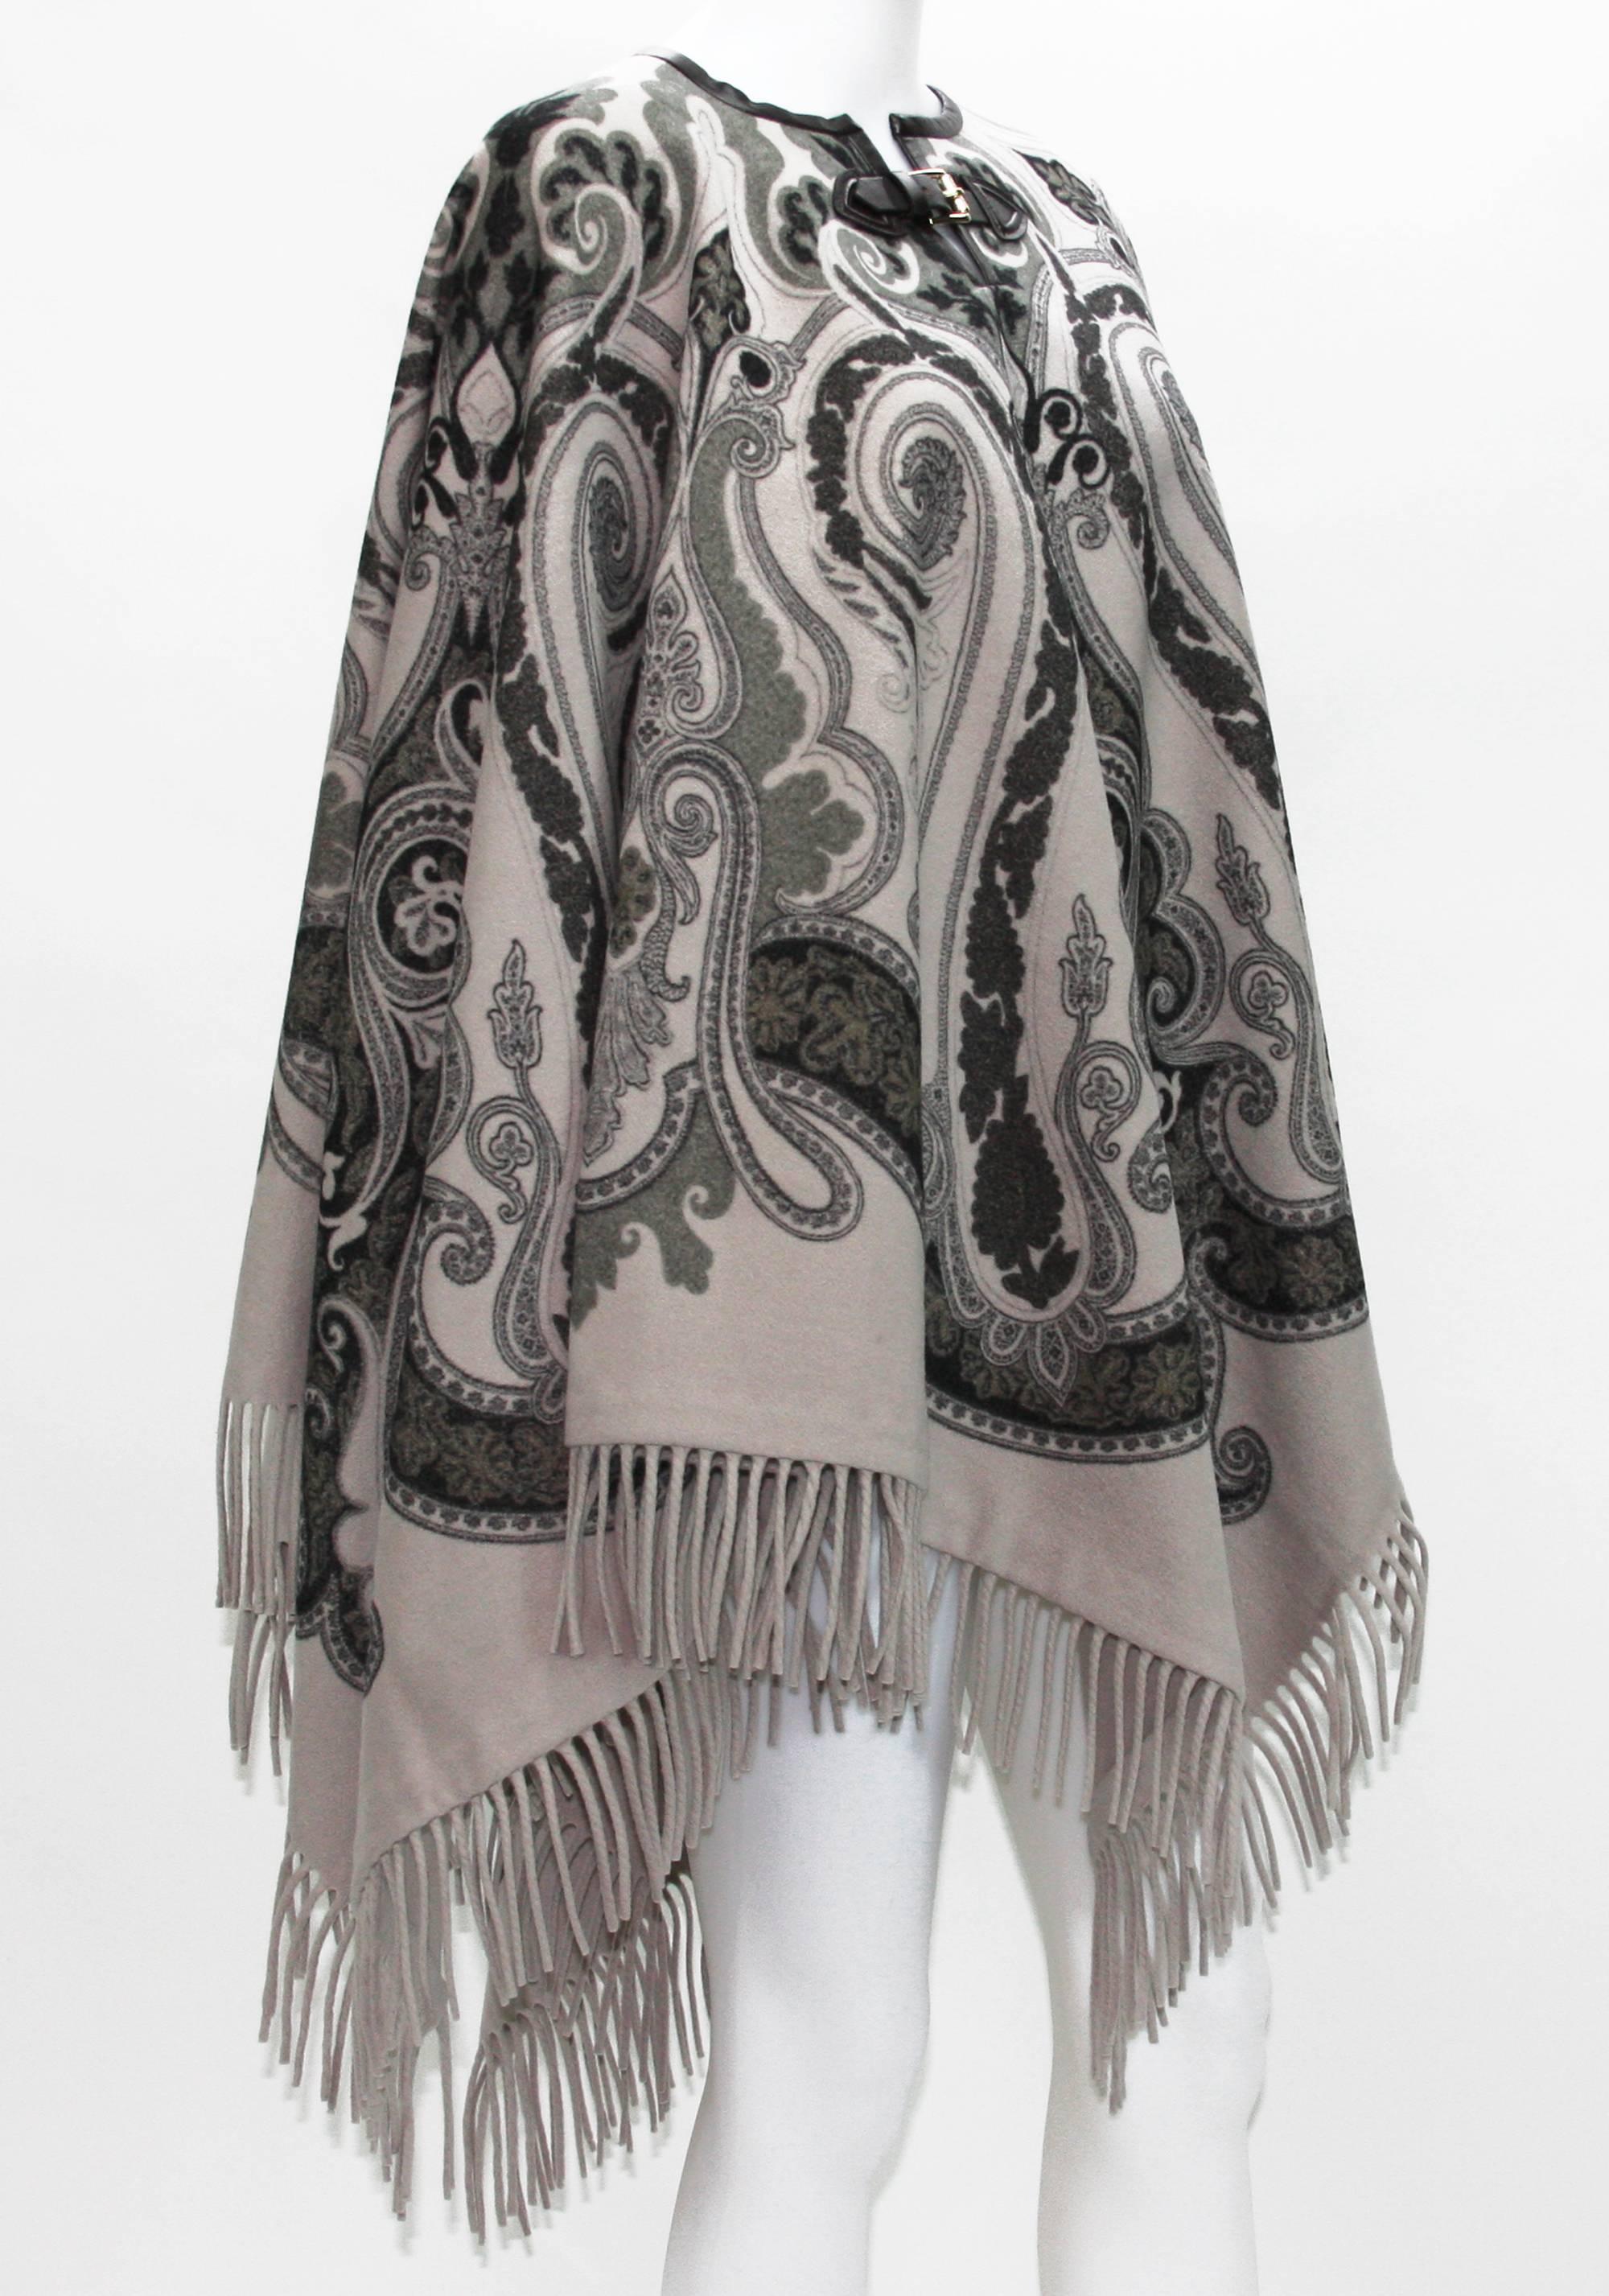 New Etro Wool Poncho Cape

100% Wool

Paisley Design, Fringe Style

Color - Few Shades of Gray

Leather trim with silver tone metal buckle closure

Measurements: 56 inches x 52.5 inches + 3.5 inches fringe from both sides

Made in